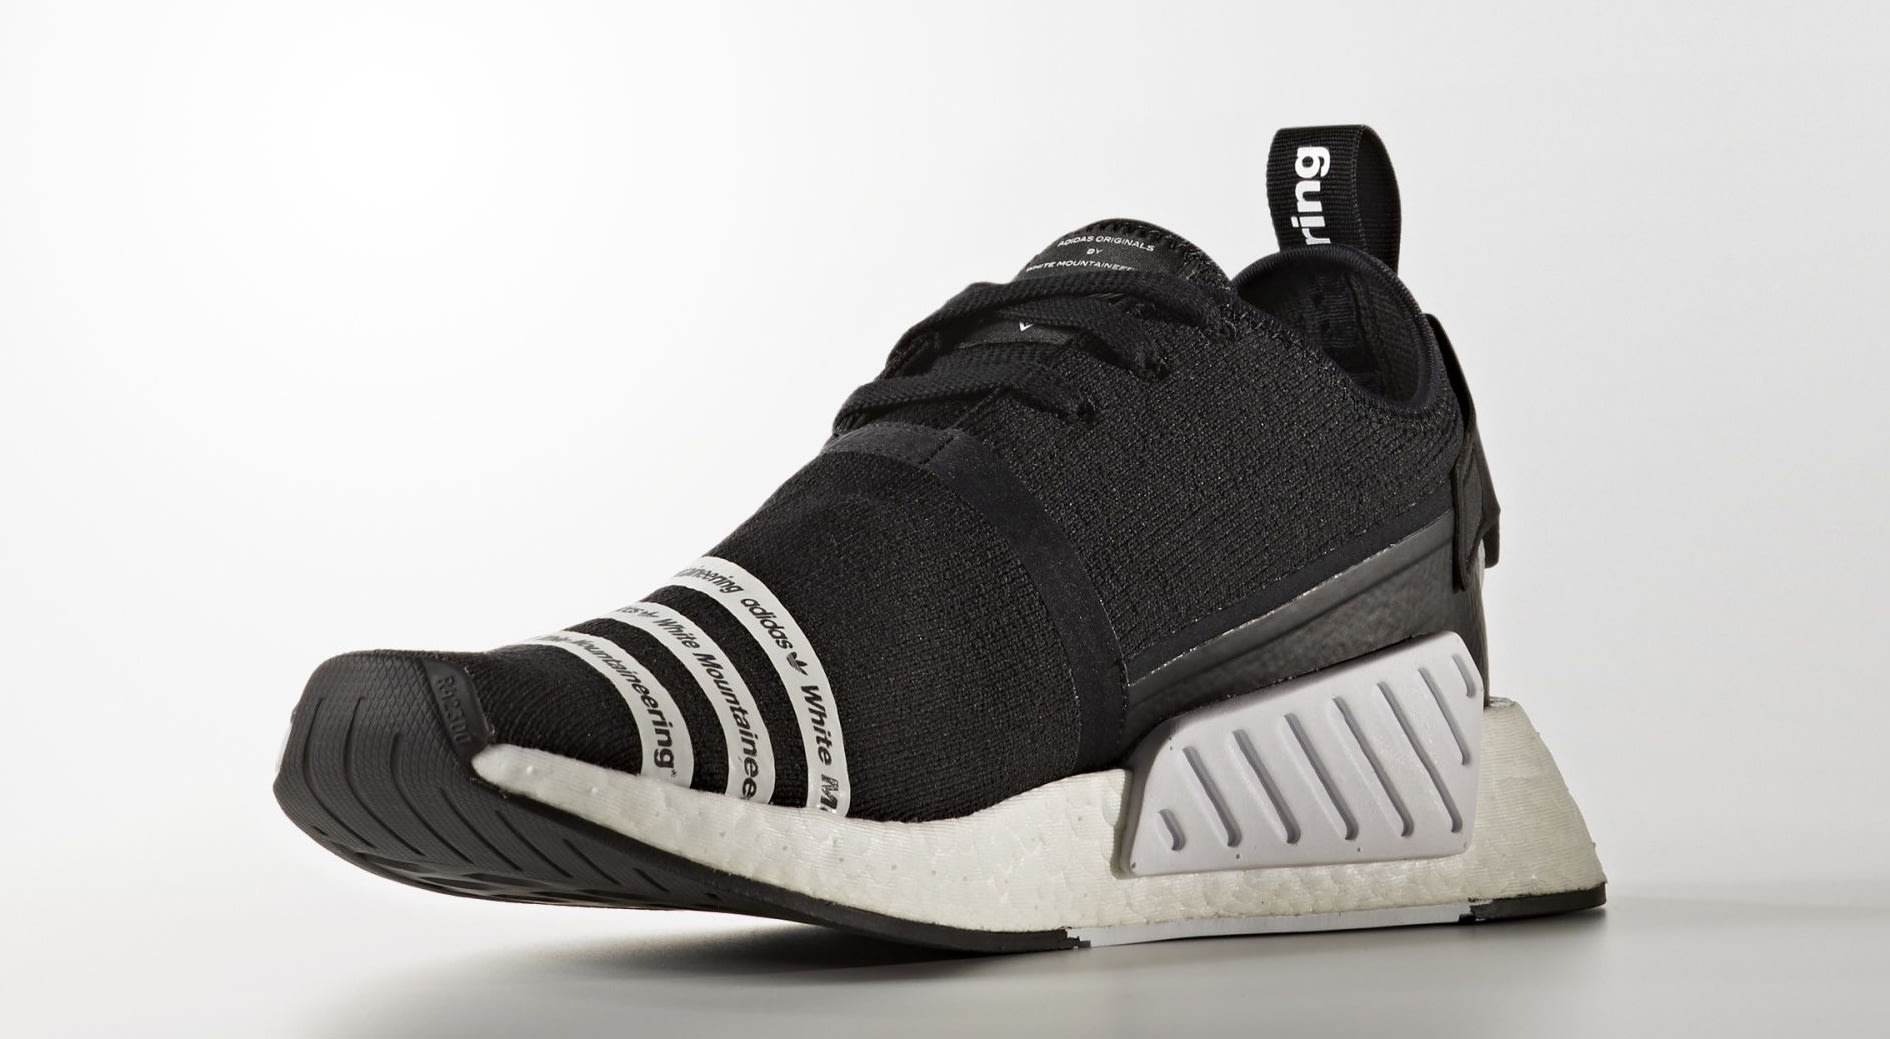 nmd stores near me